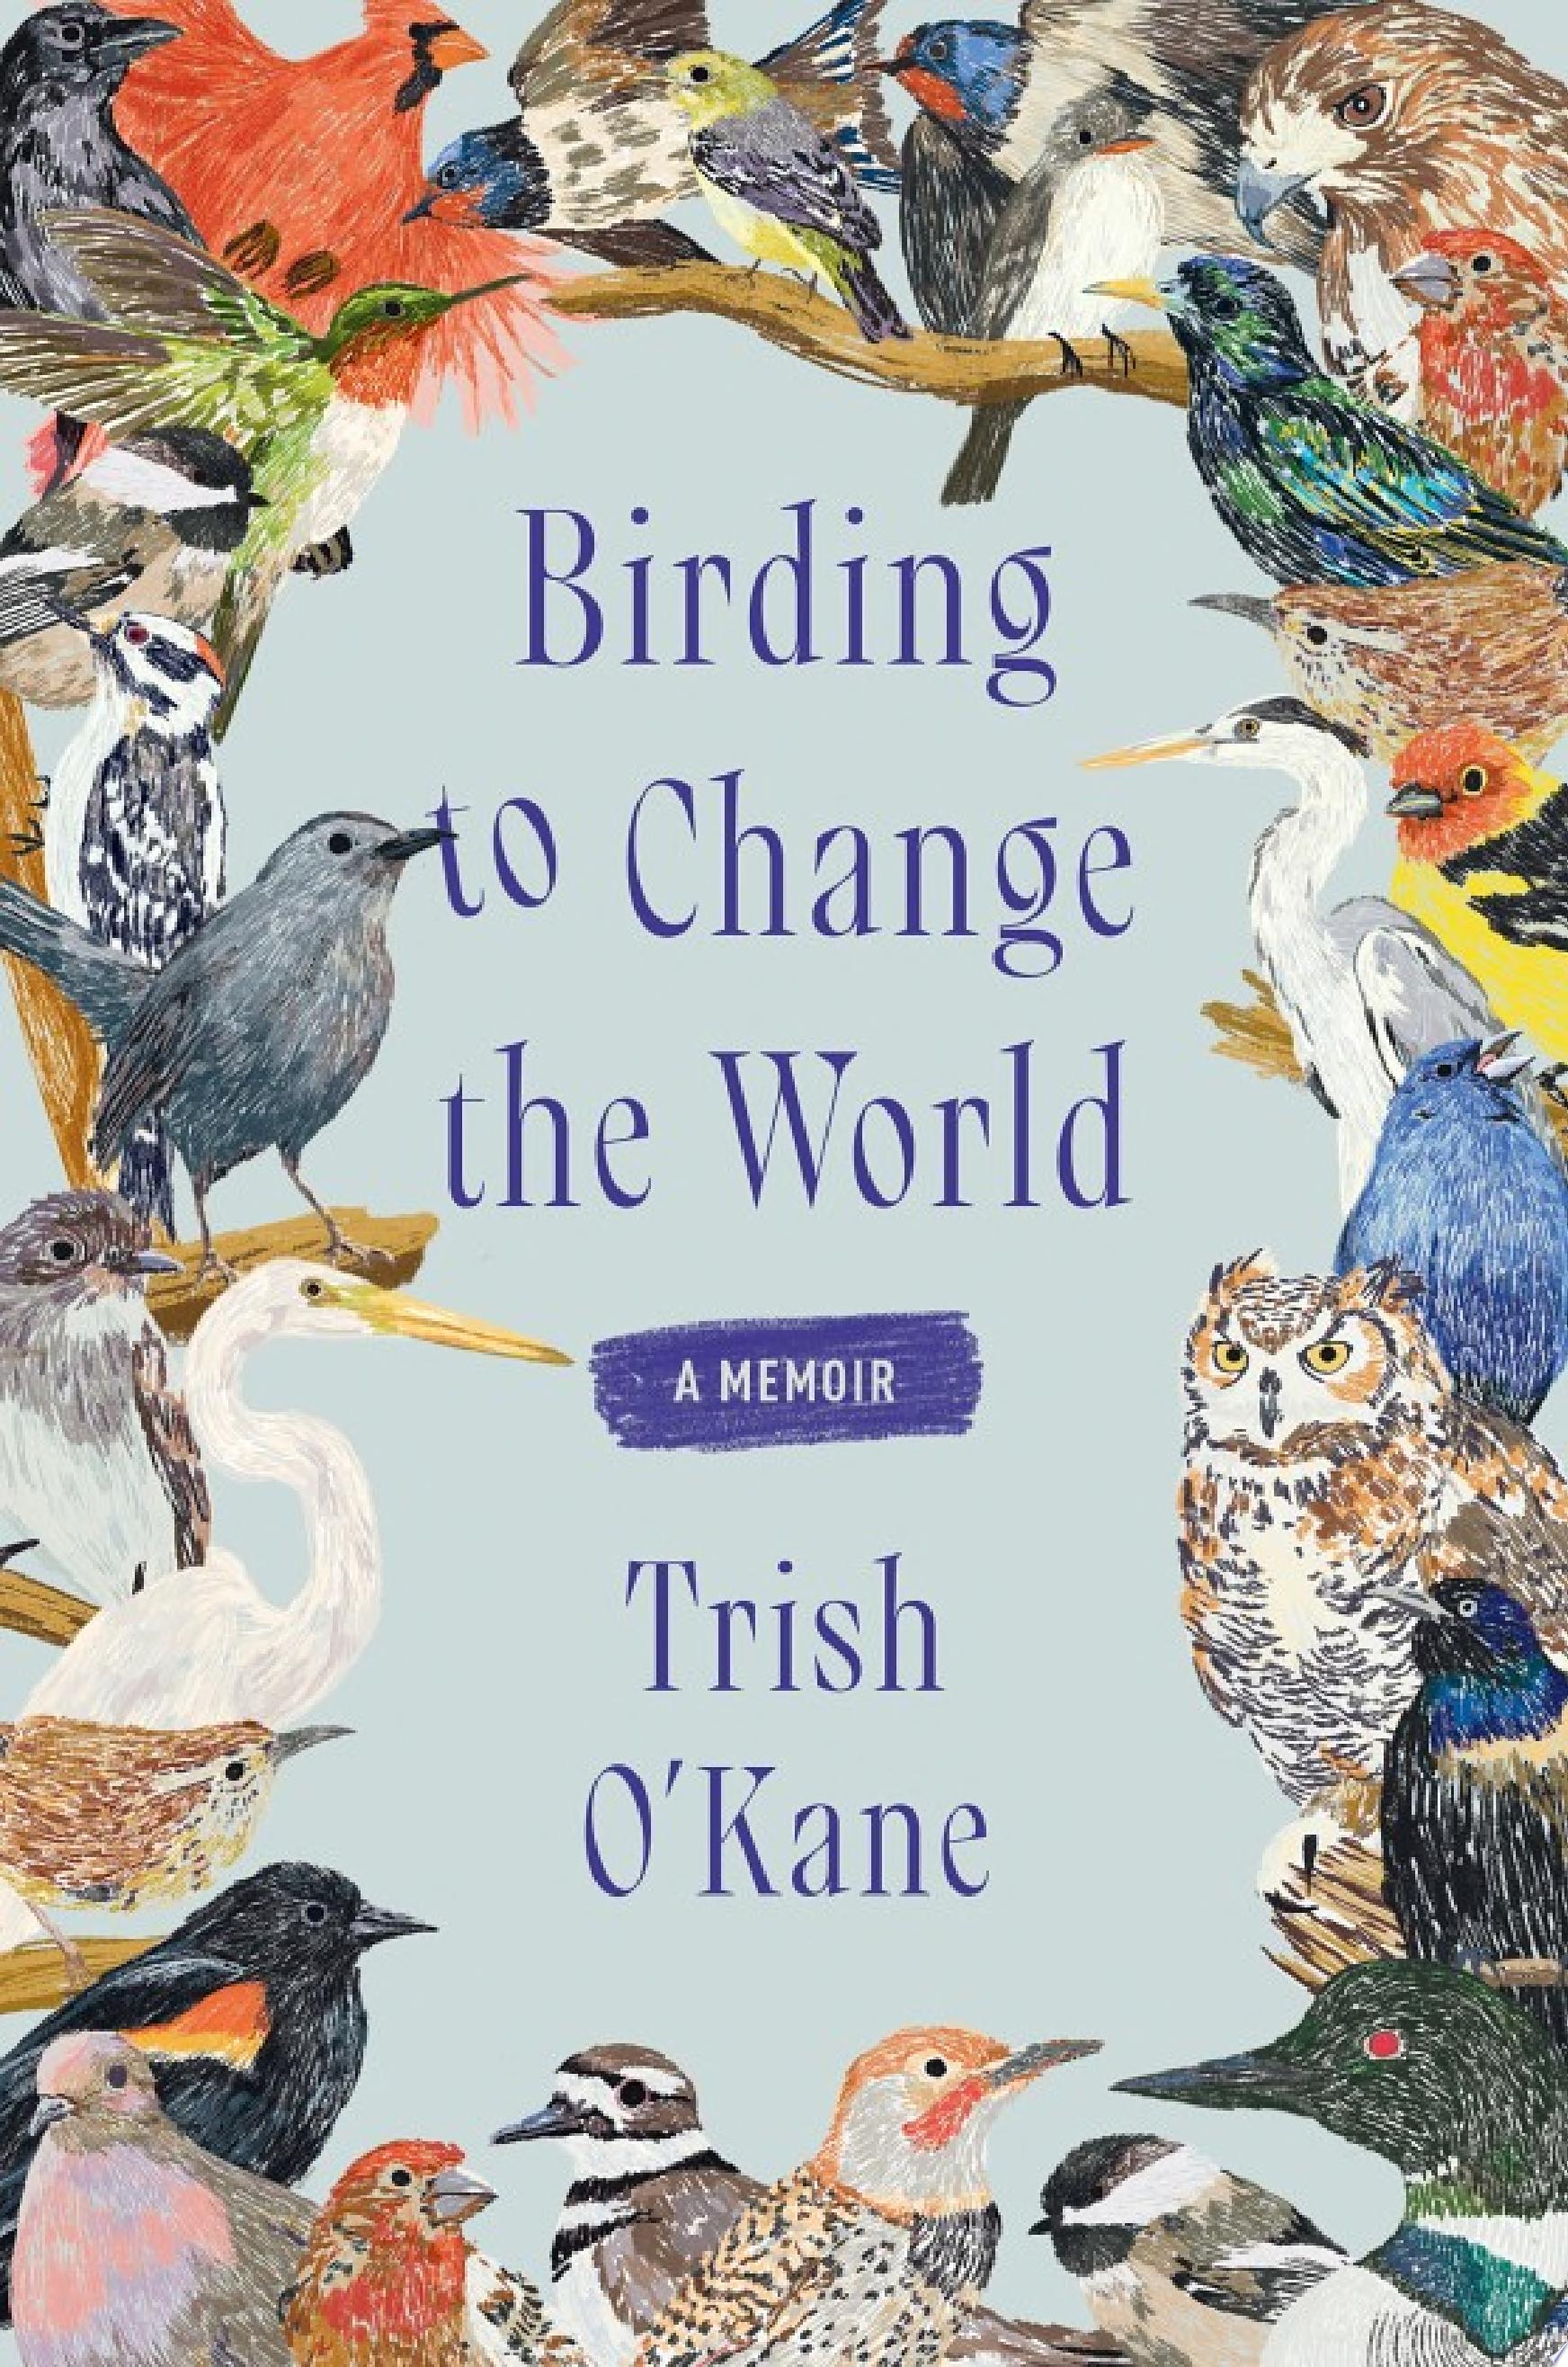 Image for "Birding to Change the World"